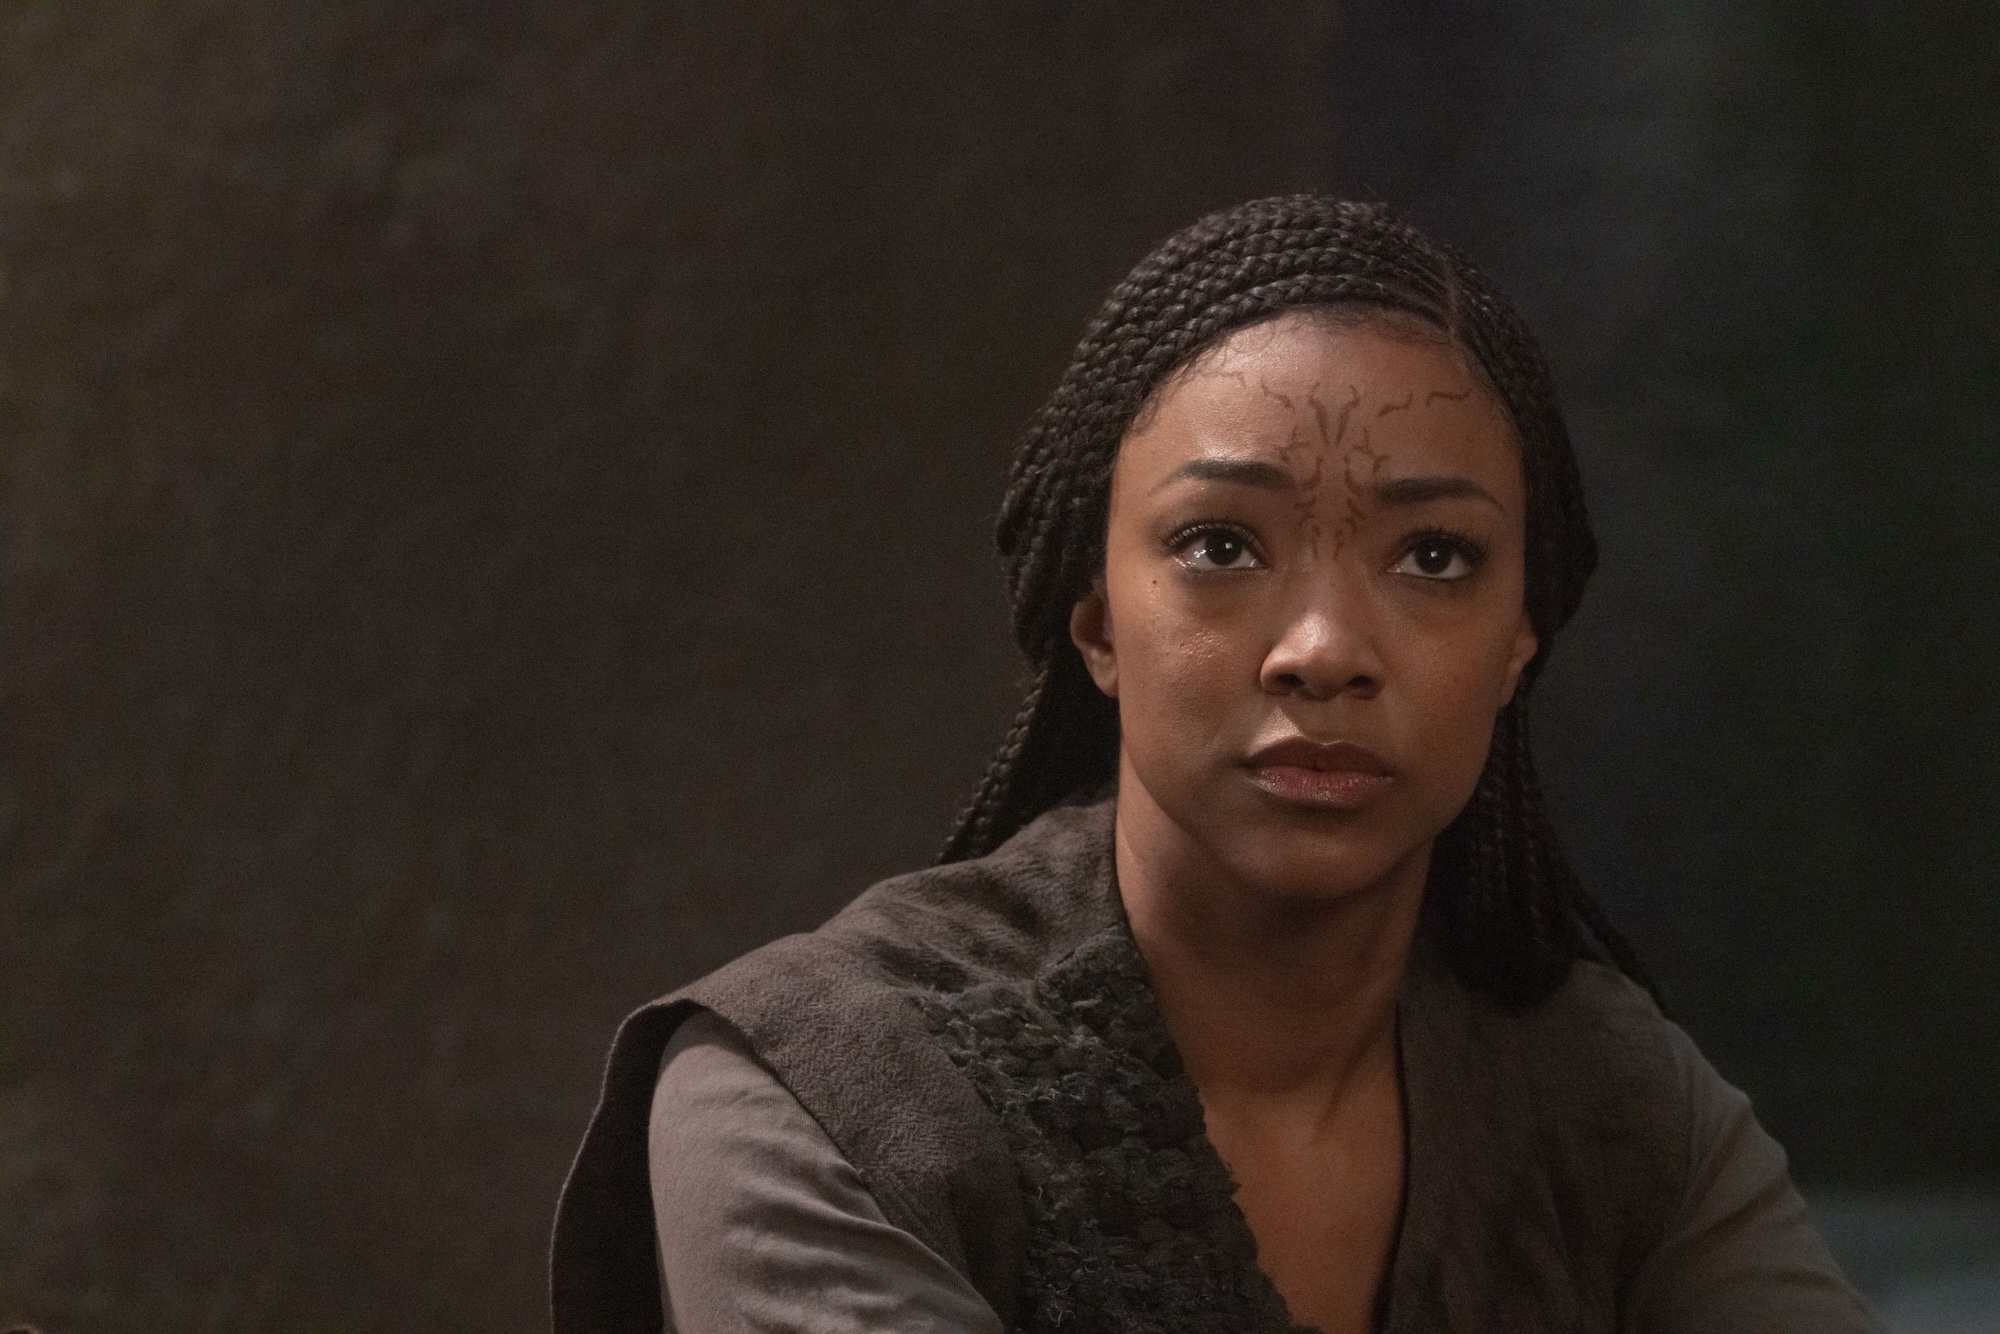 Sonequa Martin-Green as Michael Burnham in Star Trek: Discovery. She looks pensively into the distance, dressed in alien garb, with an alien marking on her forehead. 